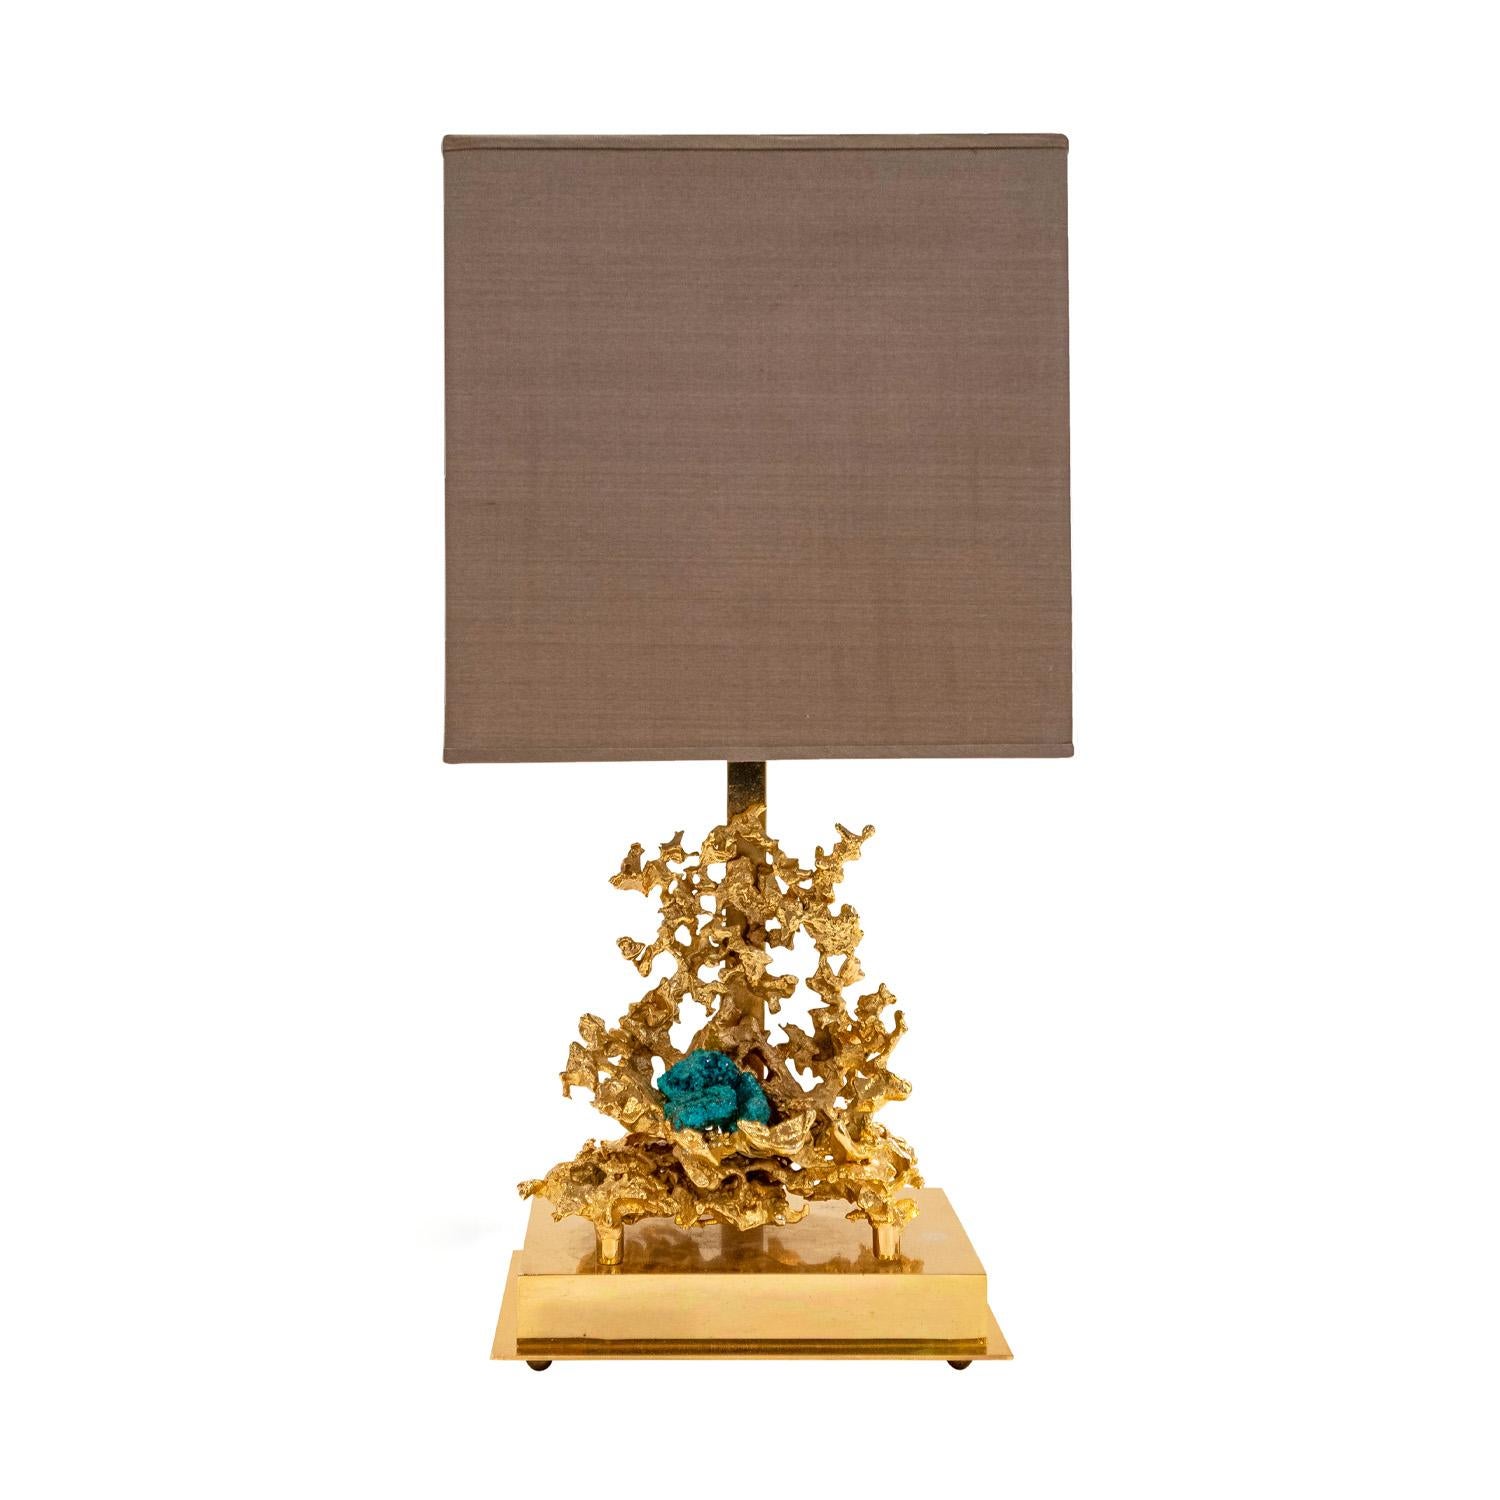 Stunning table lamp in 24-karat gold plated exploded-bronze with beautiful malachite elements in the manner of Claude Victor Boeltz, France 1970's. This lamp is work of art. It has been rewired with American sockets and silk cord with switch. New